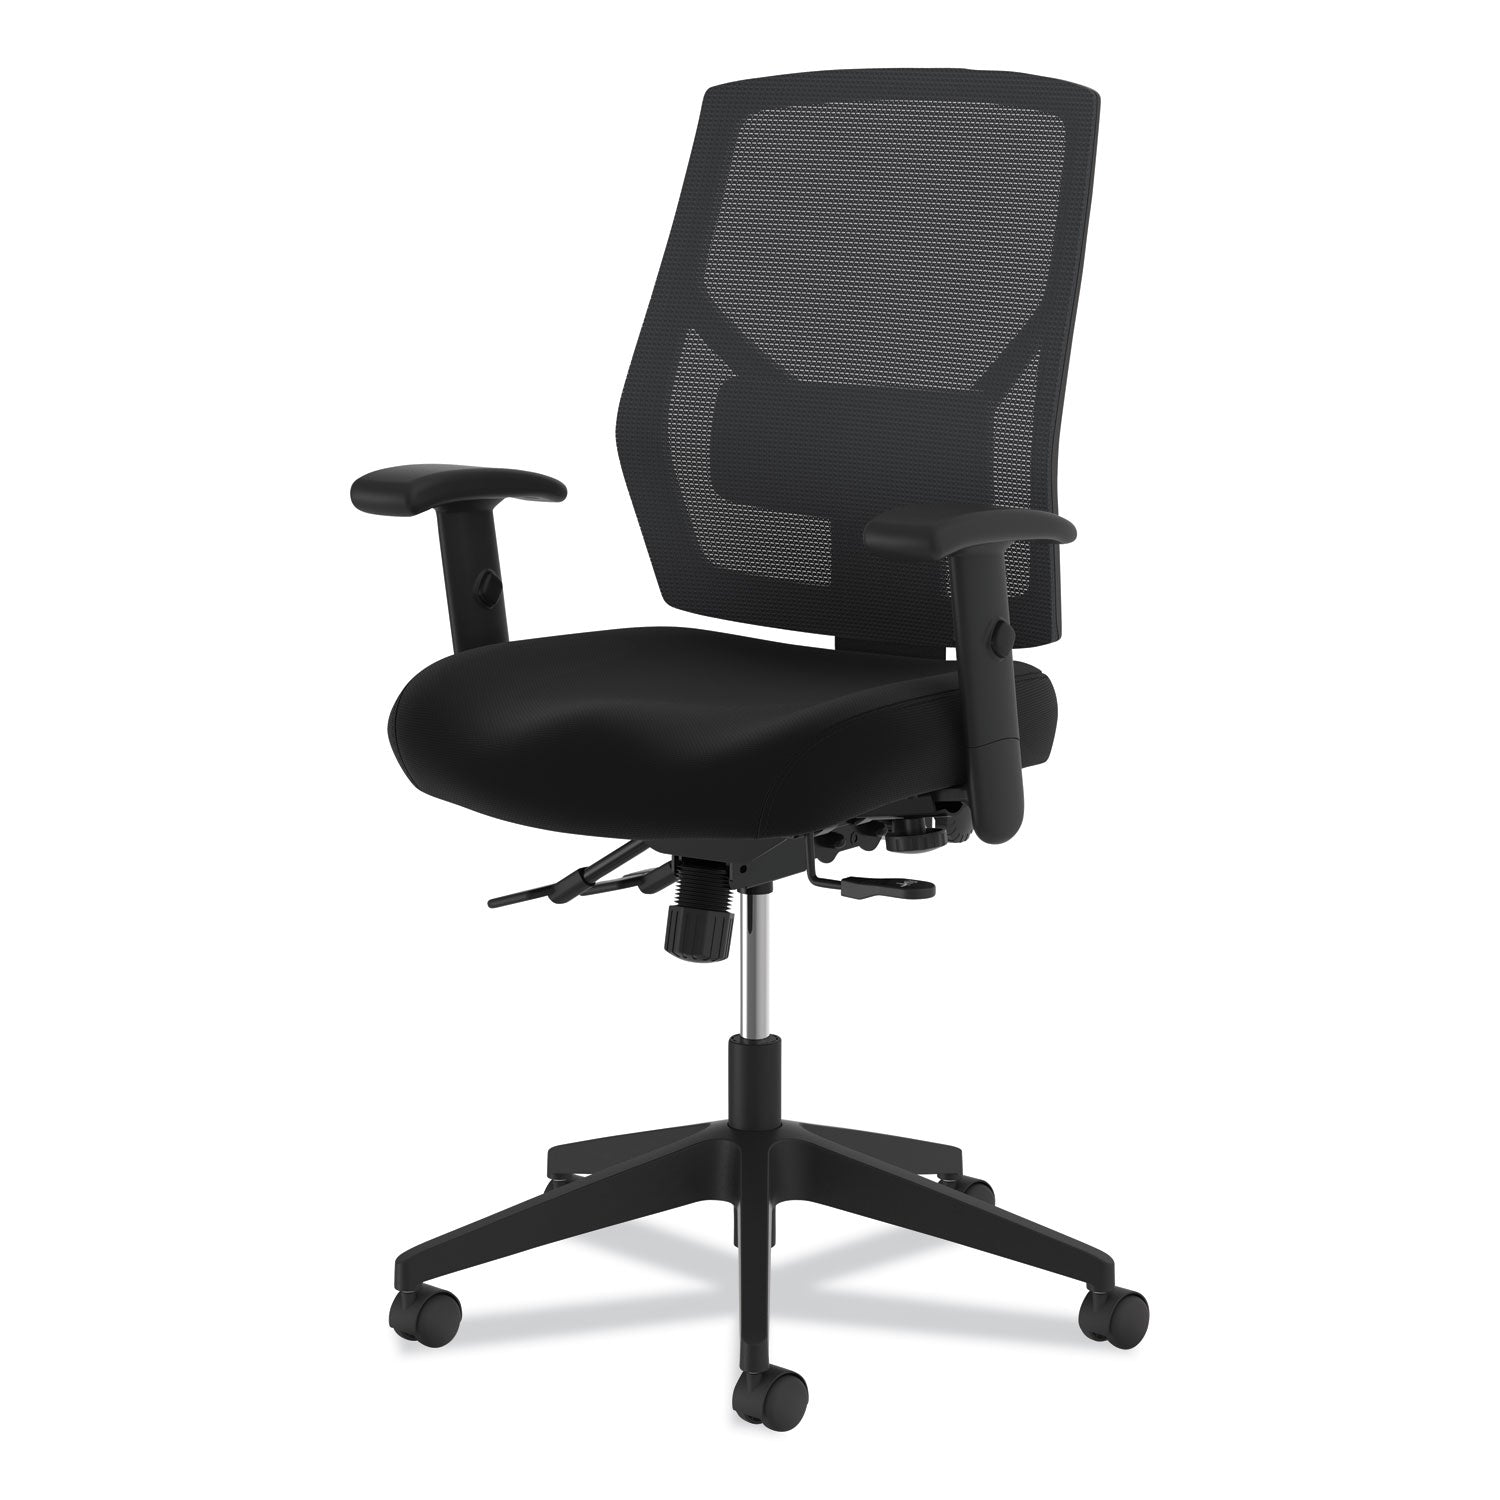 crio-high-back-task-chair-with-asynchronous-control-supports-up-to-250-lb-18-to-22-seat-height-black_bsxvl582sb11t - 6